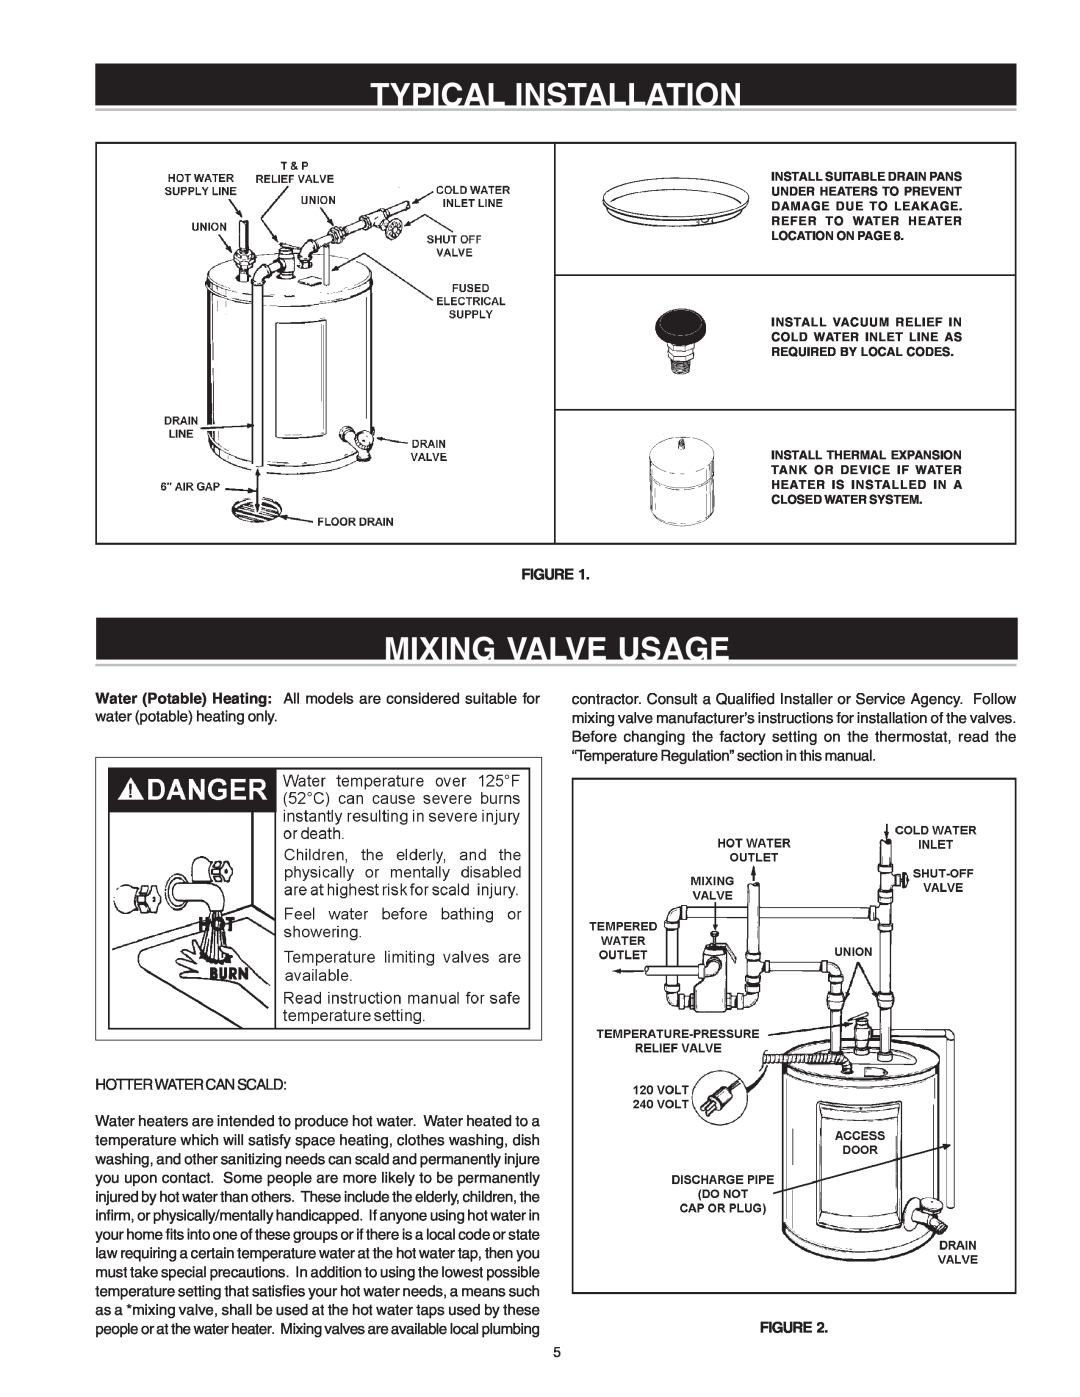 Reliance Water Heaters 184735-000 instruction manual Typical Installation, Mixing Valve Usage, Install Suitable Drain Pans 